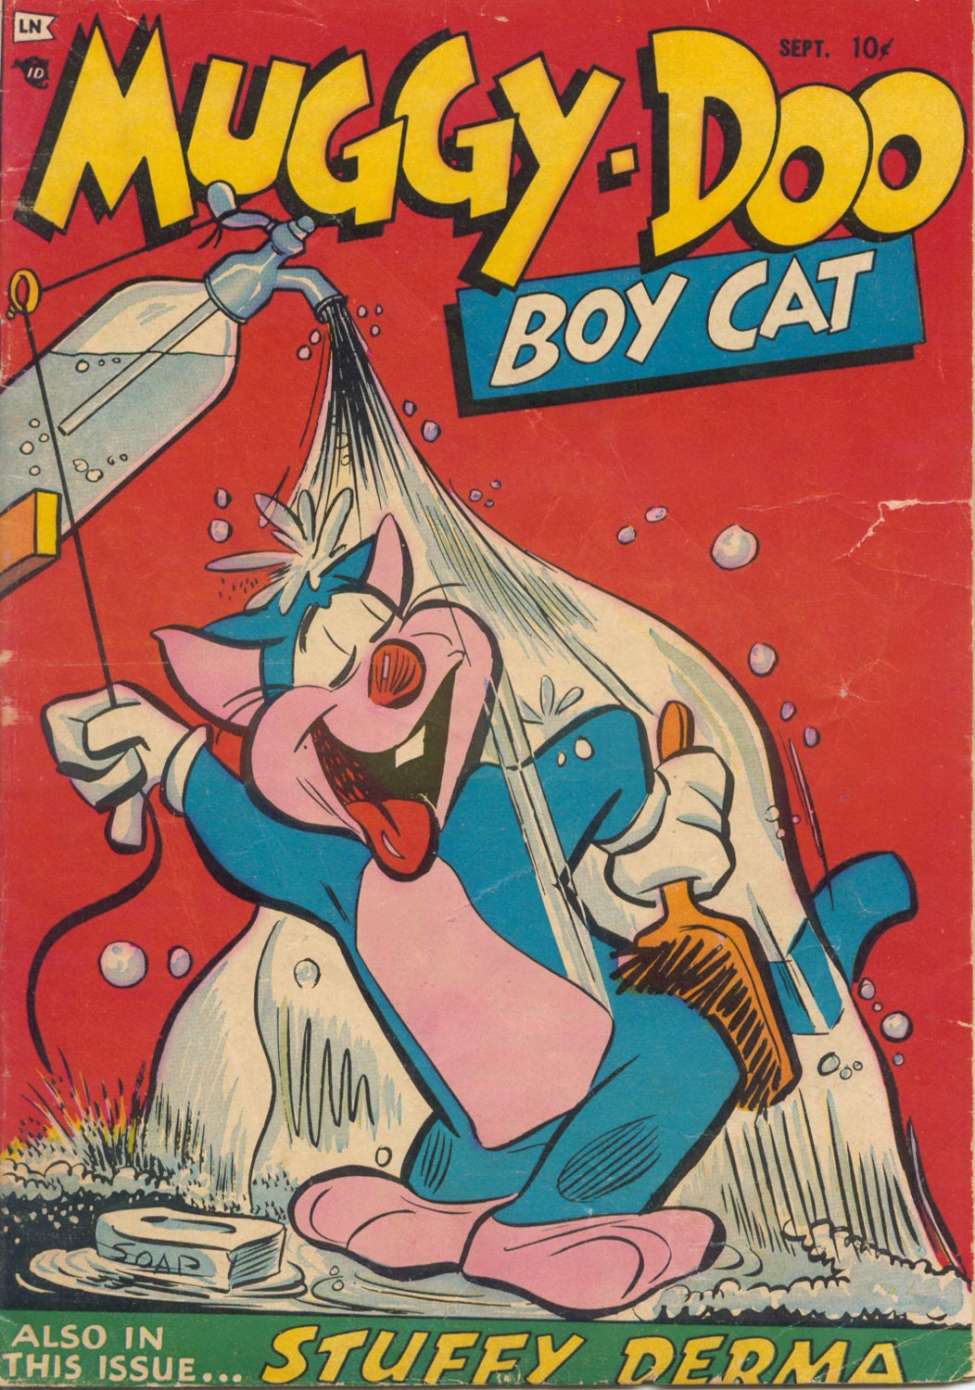 Comic Book Cover For Muggy-Doo Boy Cat 2 (1 story)